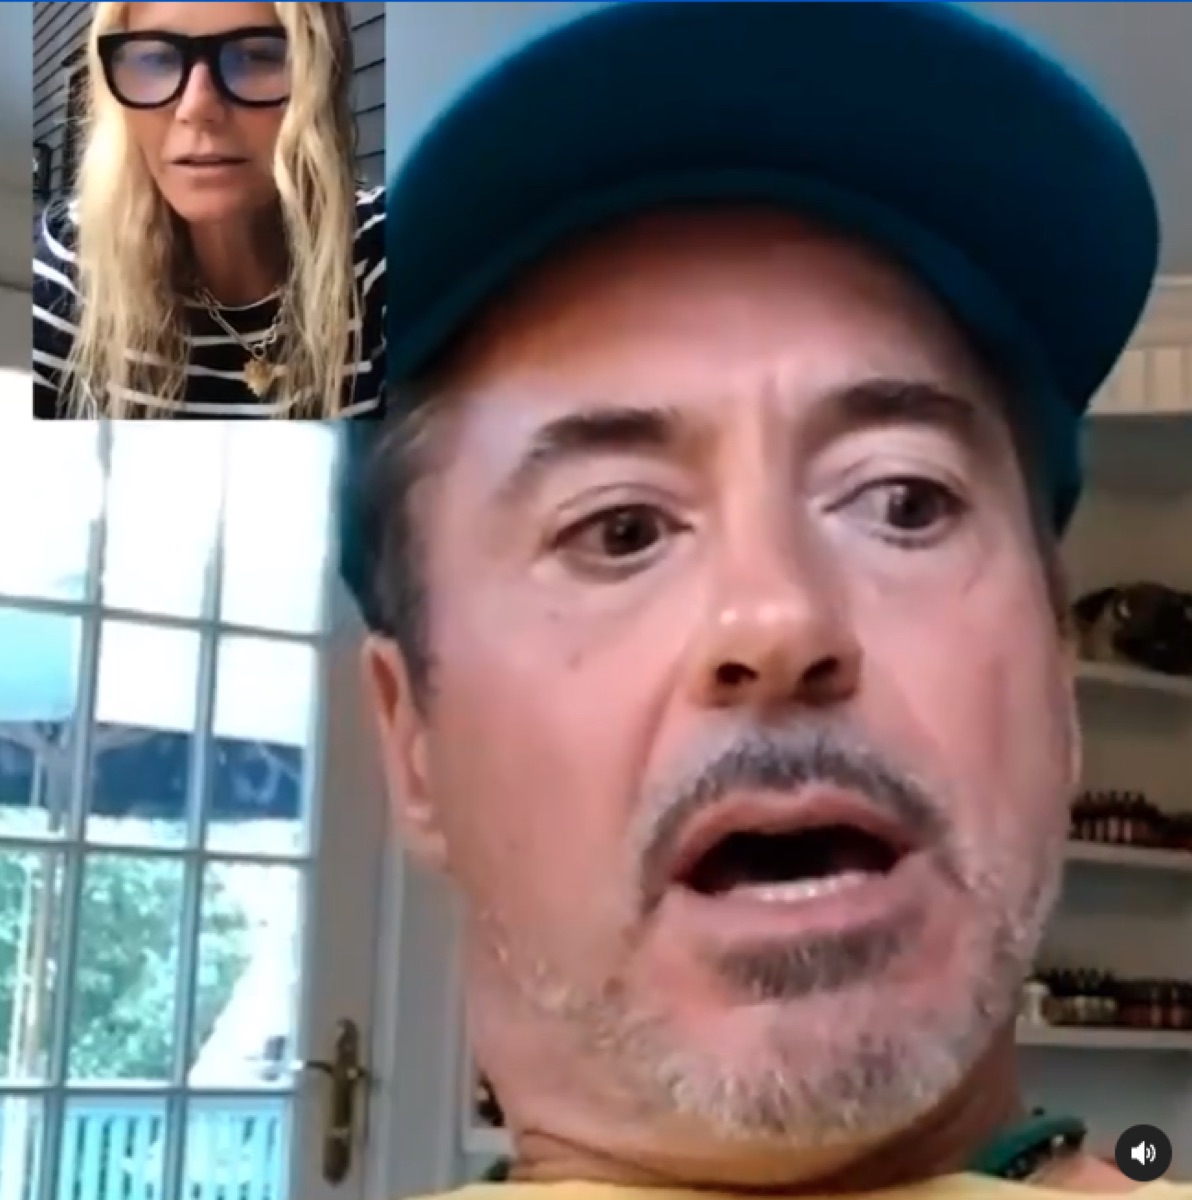 Gwyneth Paltrow and Robert Downey Jr FaceTiming